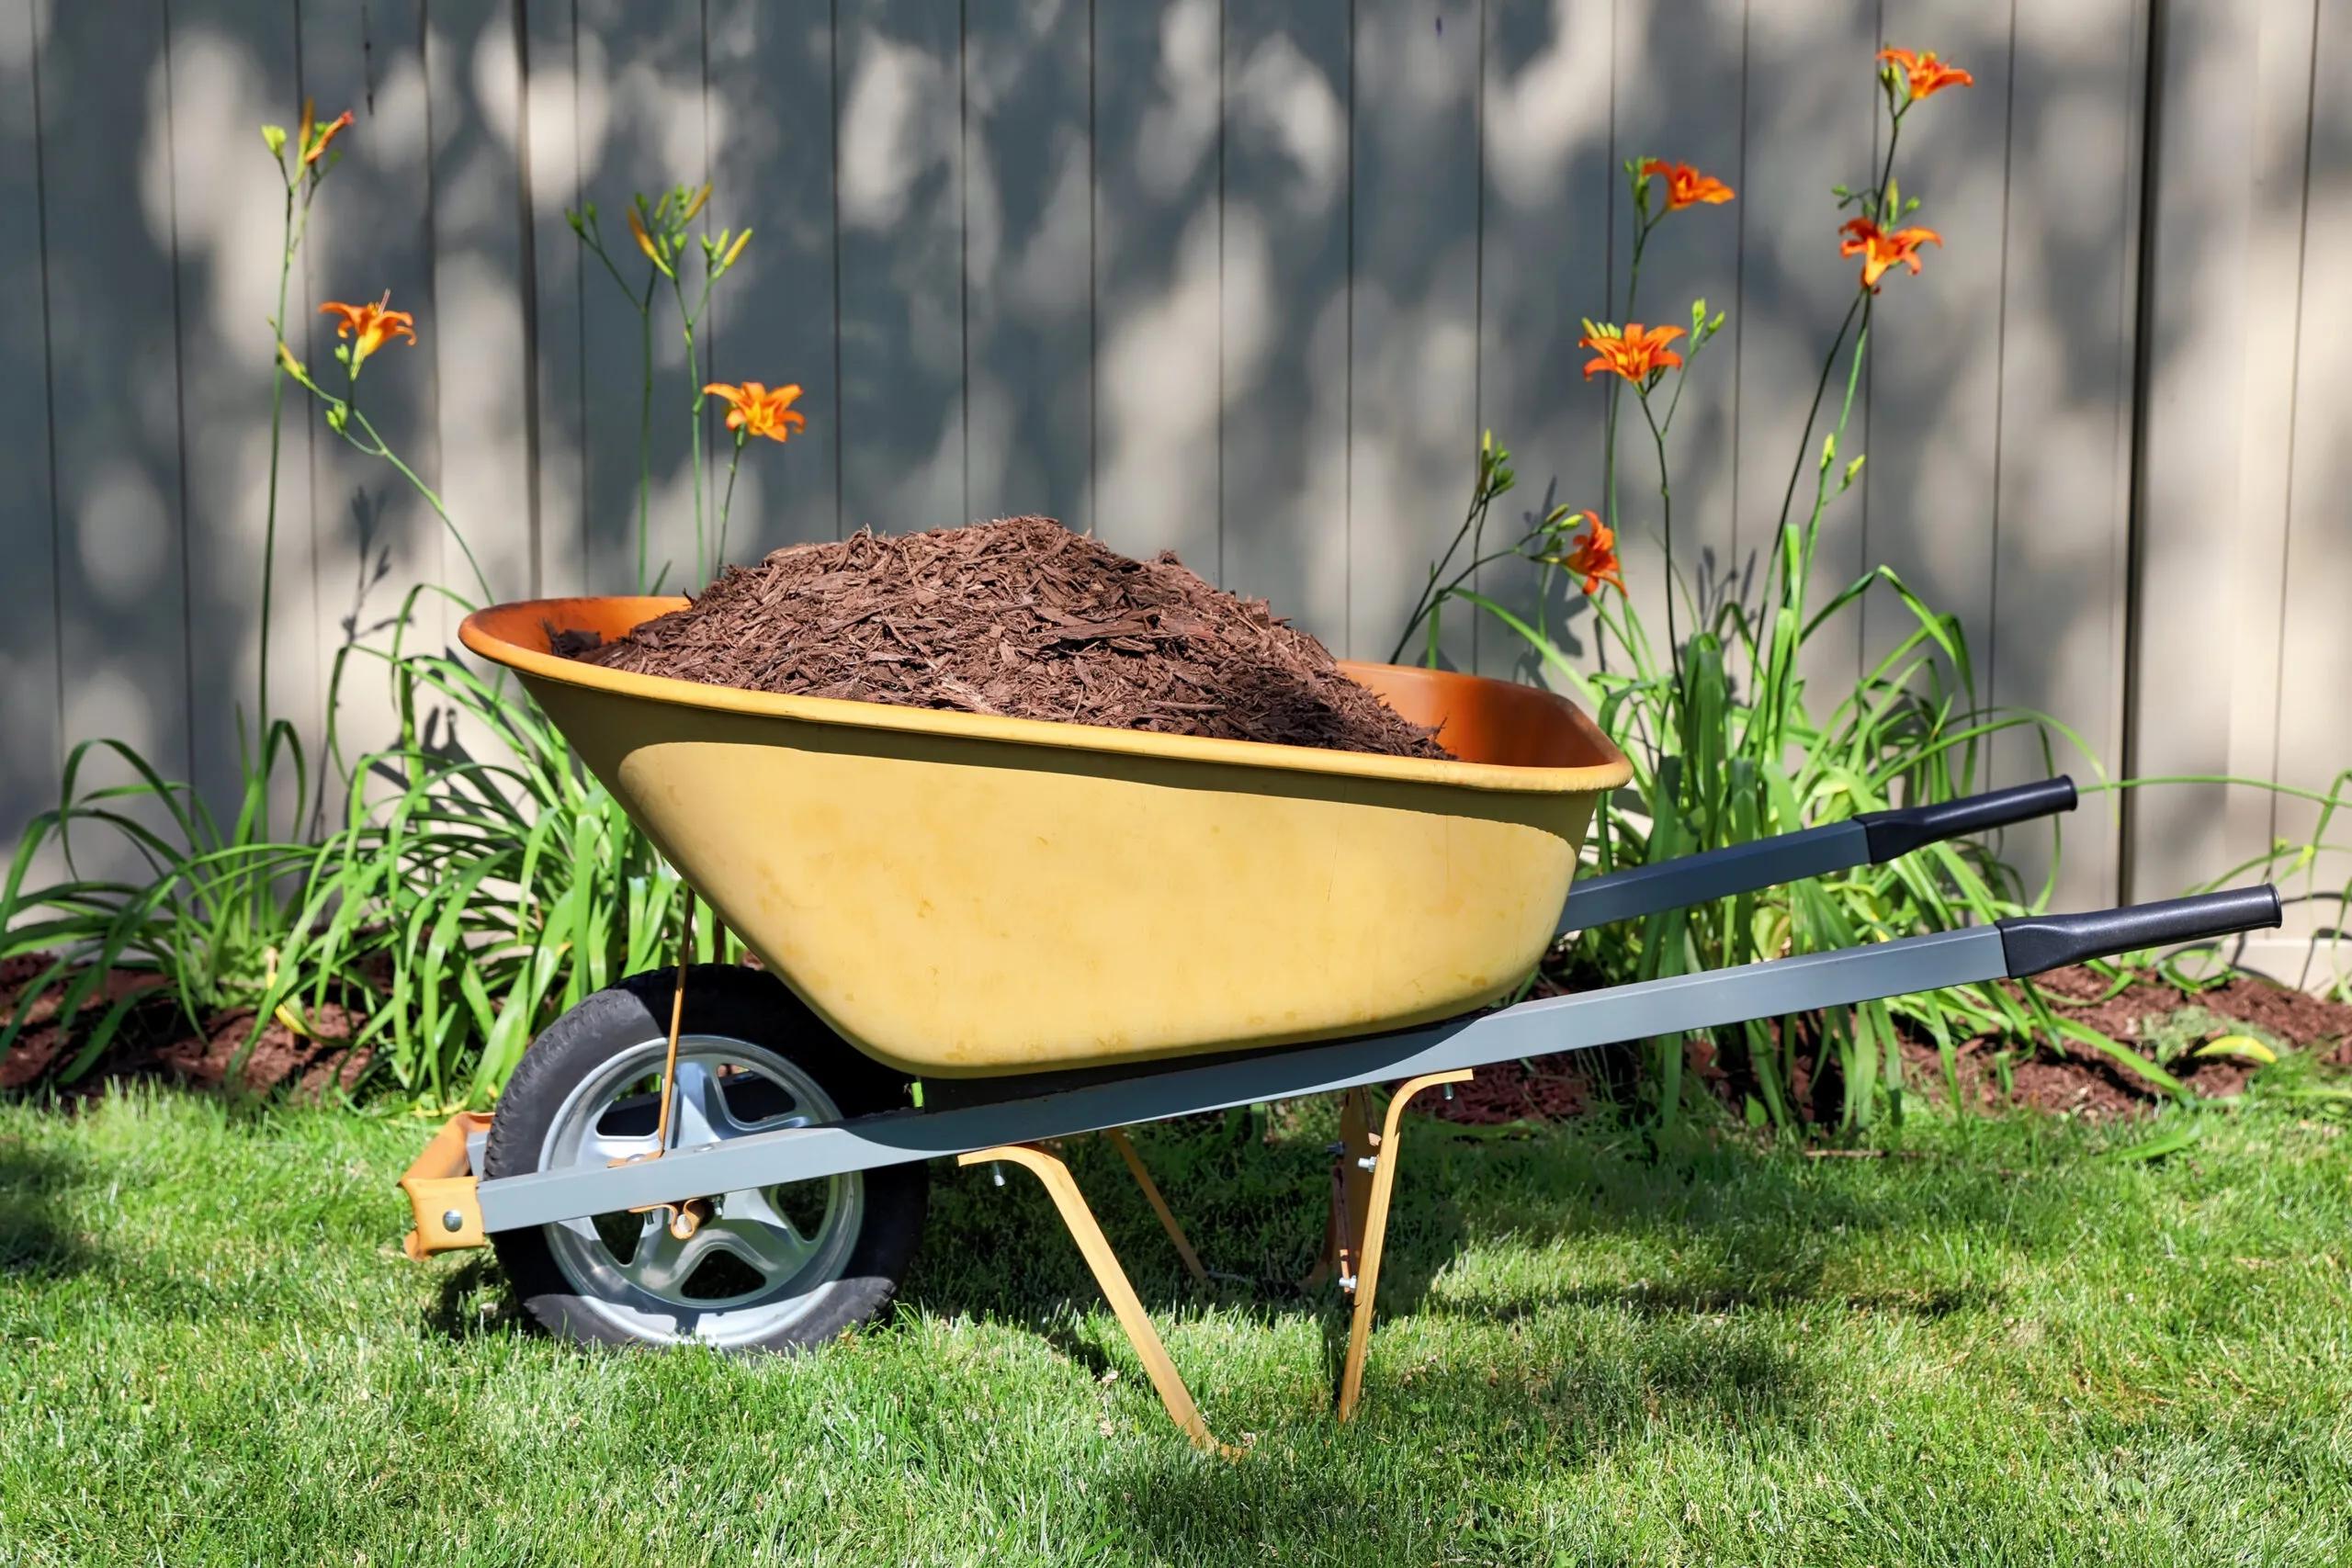 How Much Does Mulch Cost?